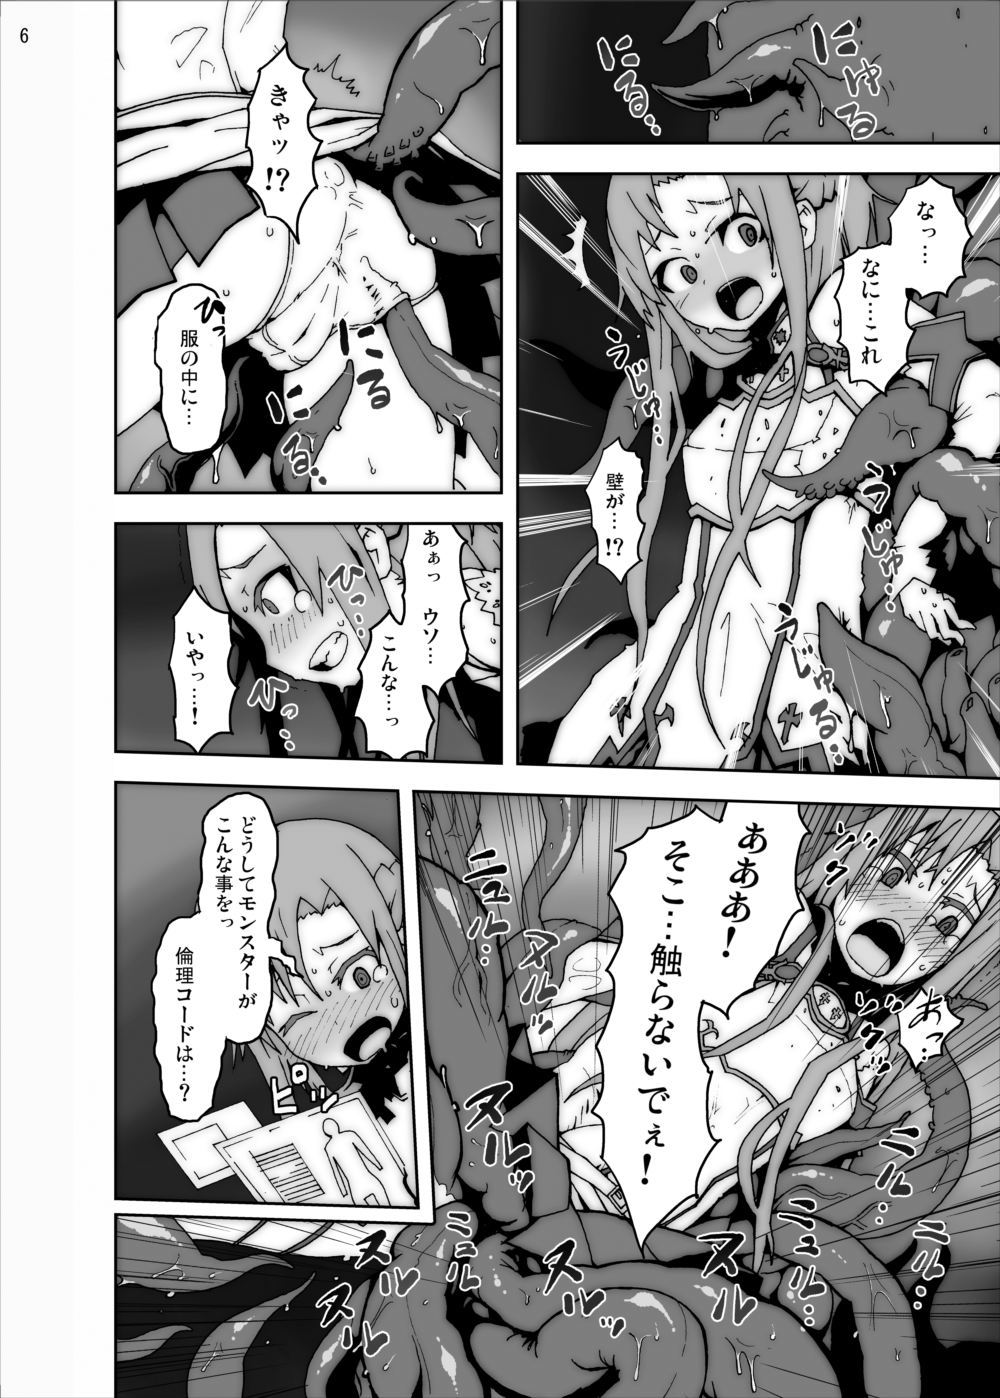 Sword Art Online Tentacle Porn - Asuna in Tentacle Party Rape Online - Page 5 - HentaiEra